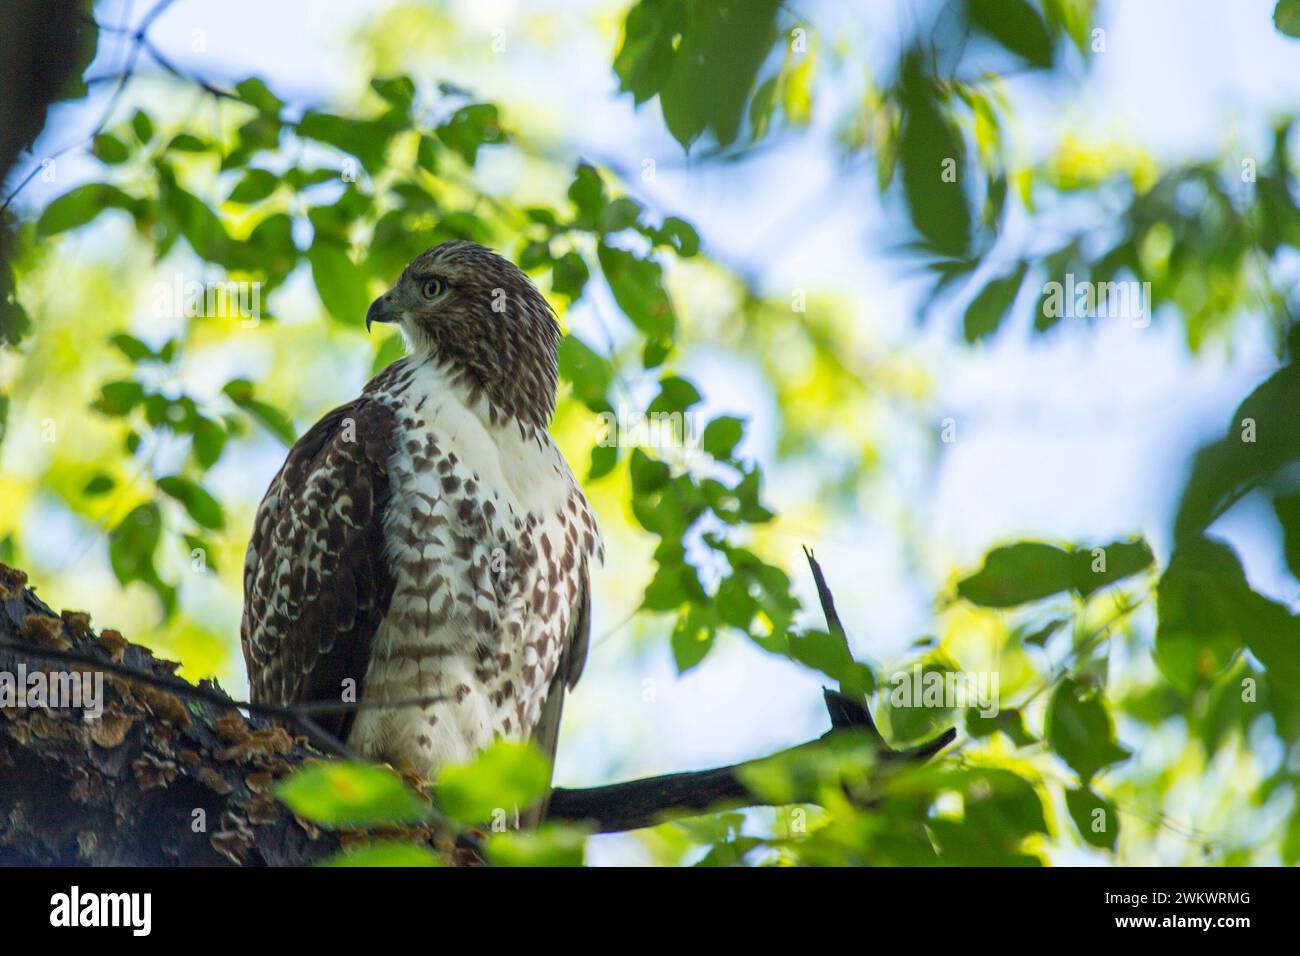 Northern Harrier (Circus cyaneus) spotted in Central Park, New York Stock Photo